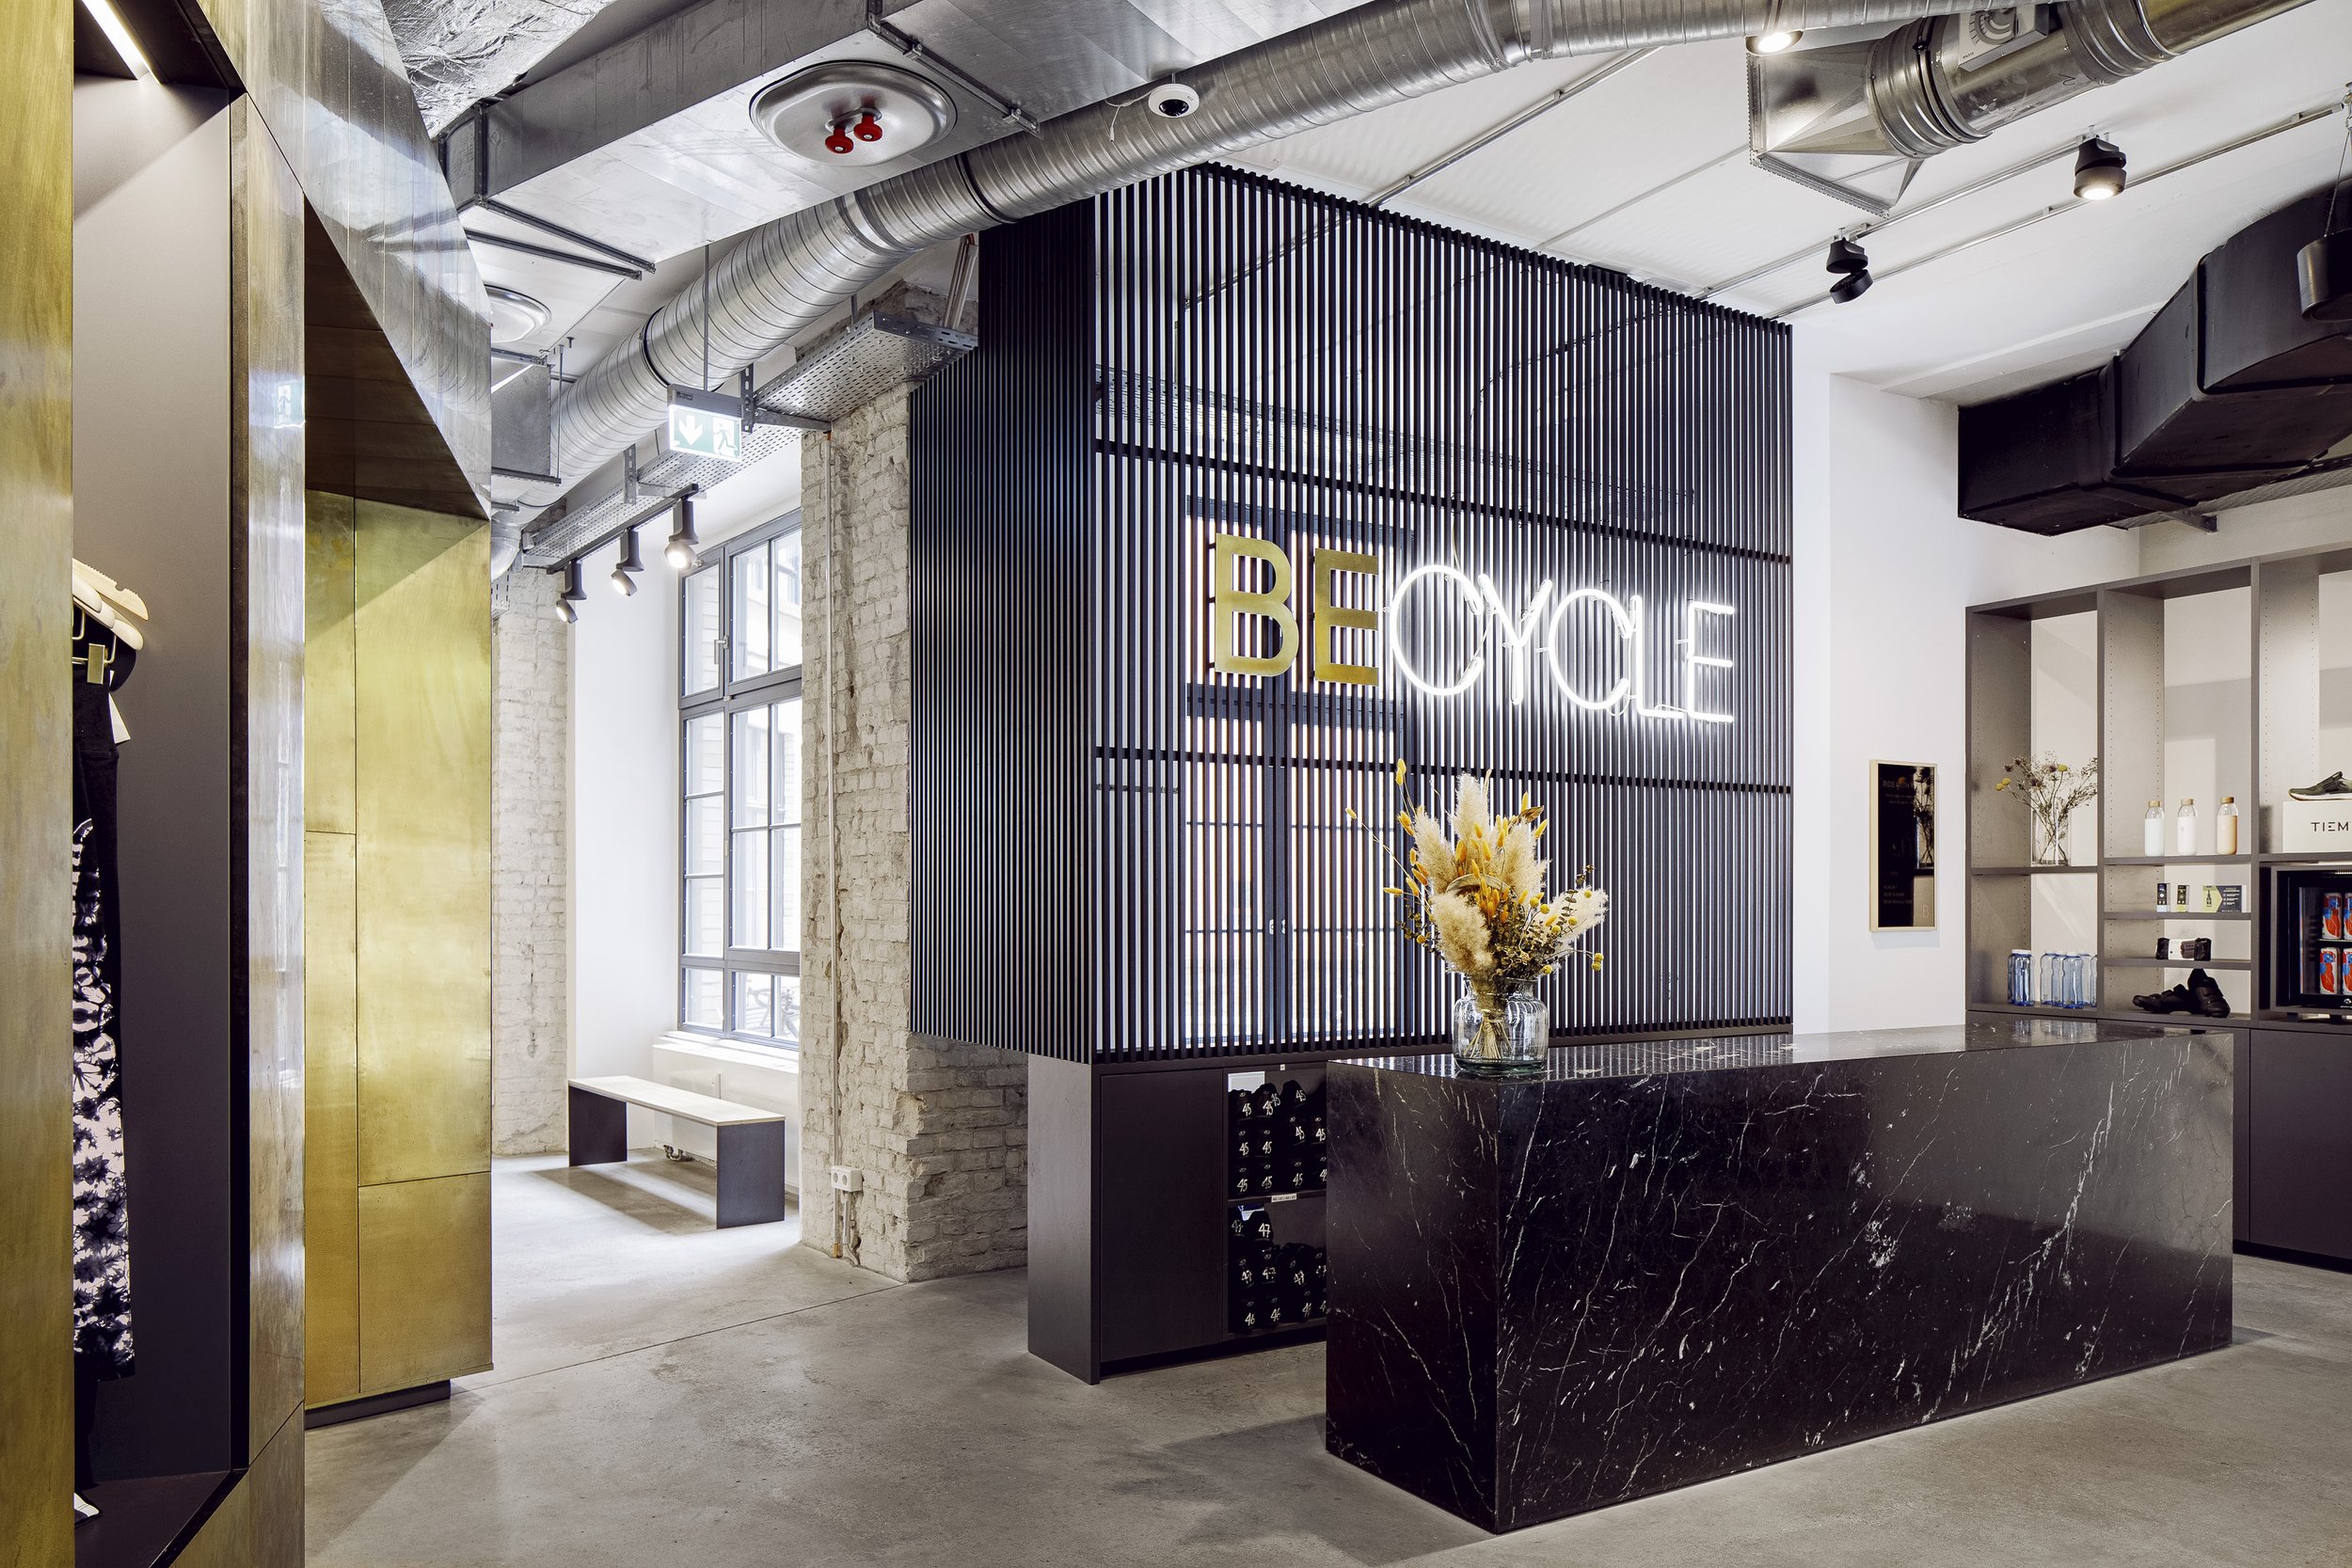 BECYCLE, Berlin